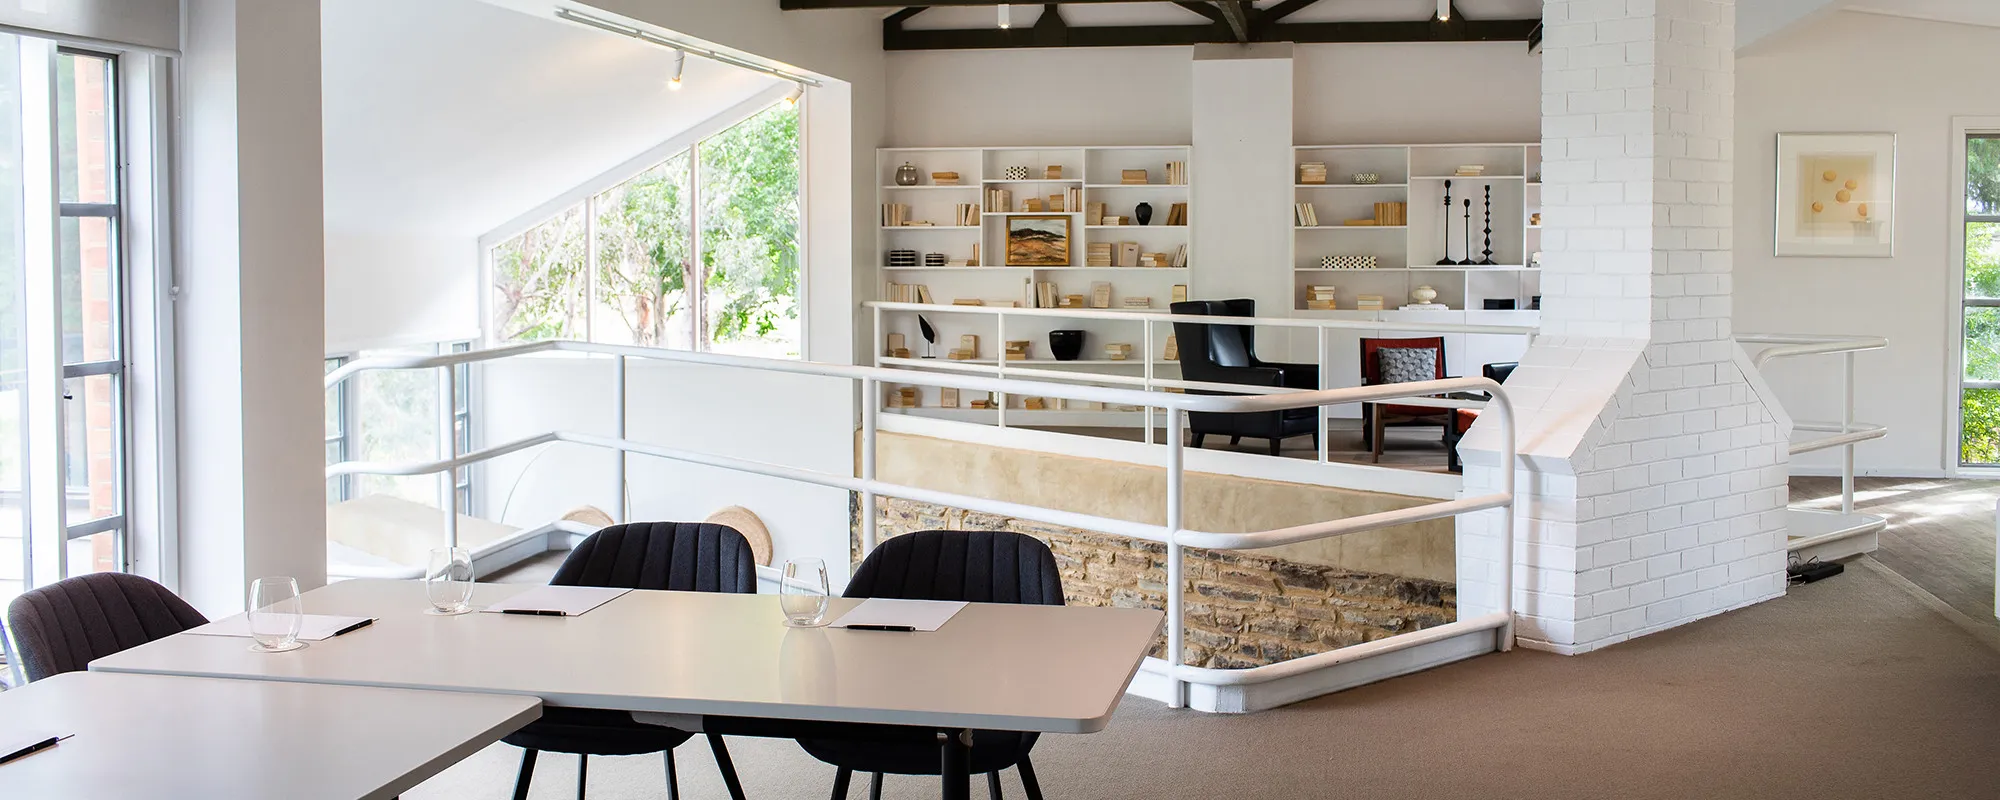 Lancemore Macedon Ranges Conference Venue Regional Conferencing Dairy Room 1 2000x800